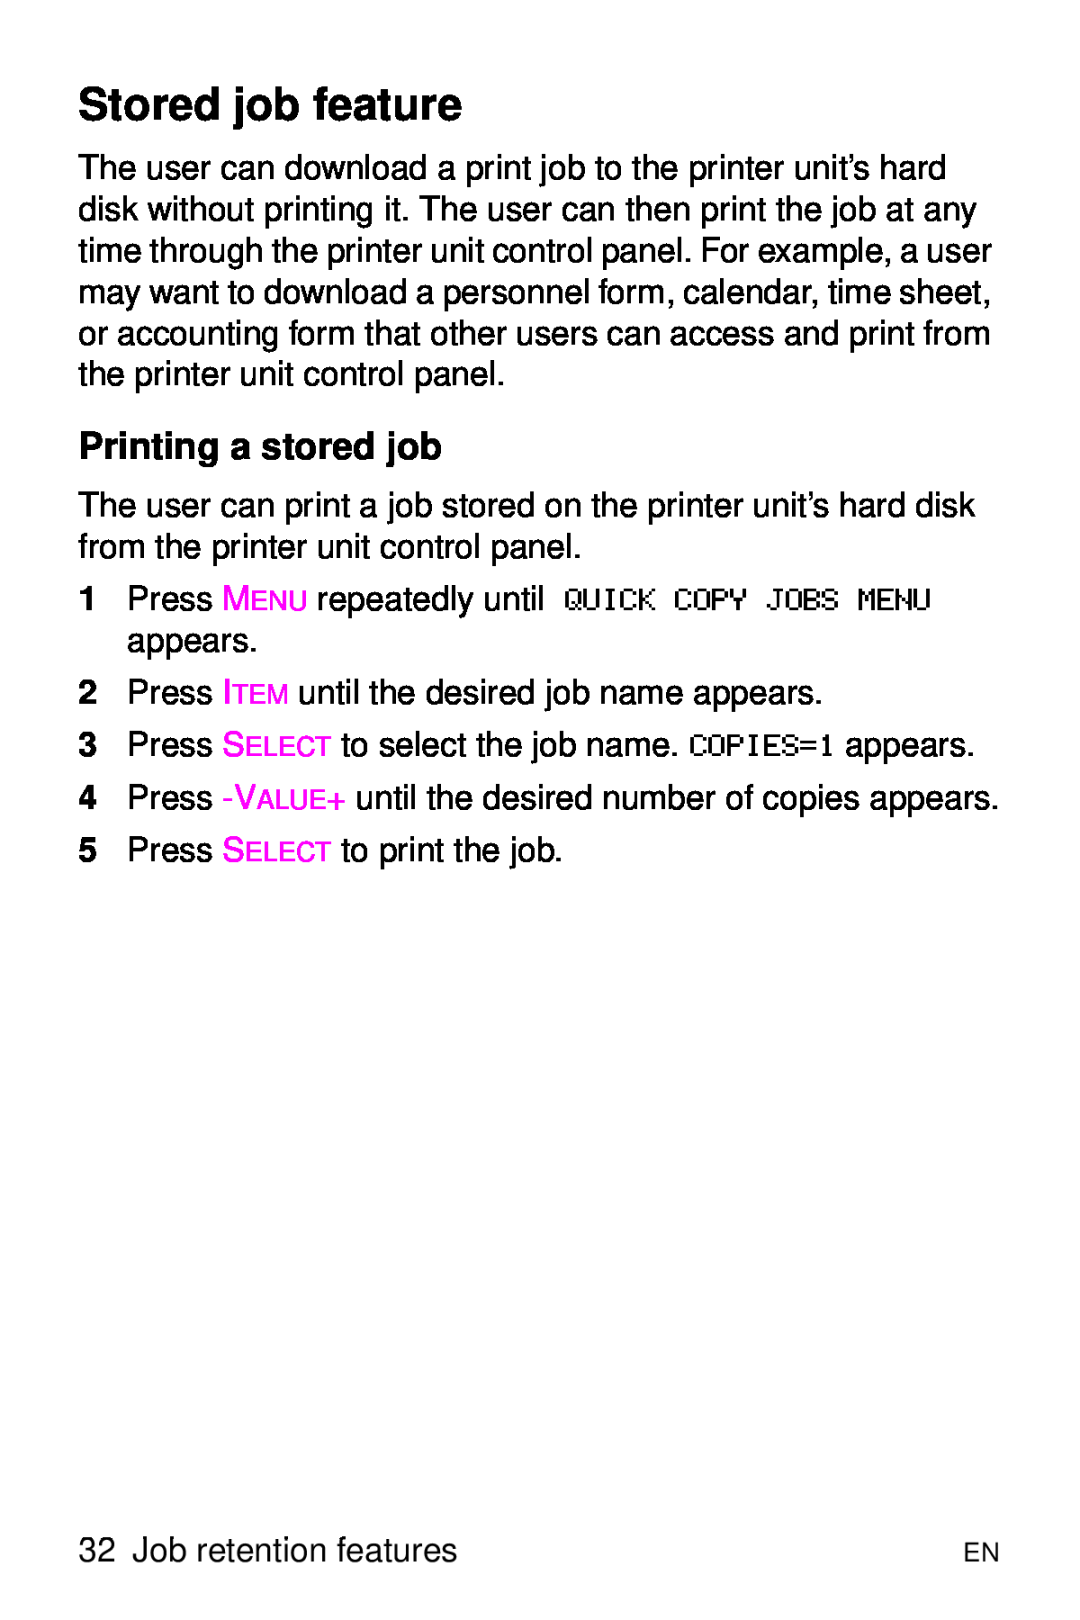 HP 8000 s manual Stored job feature, Printing a stored job 